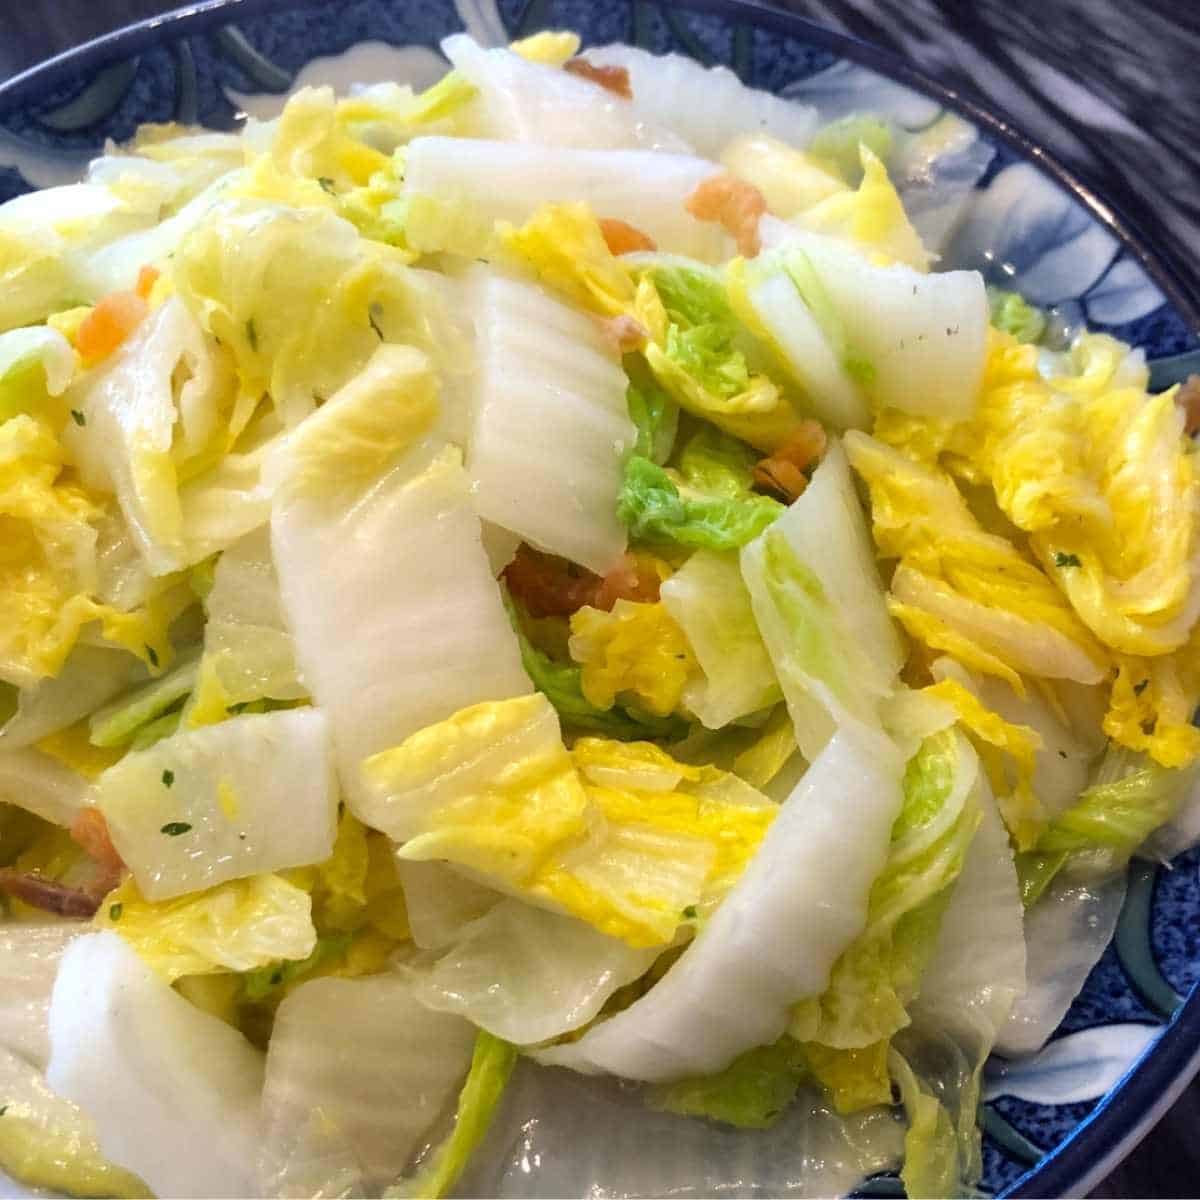 dried shrimp and napa cabbage - Is Dry Shrimp Keto? A Nutritionist Ways in with Recipes